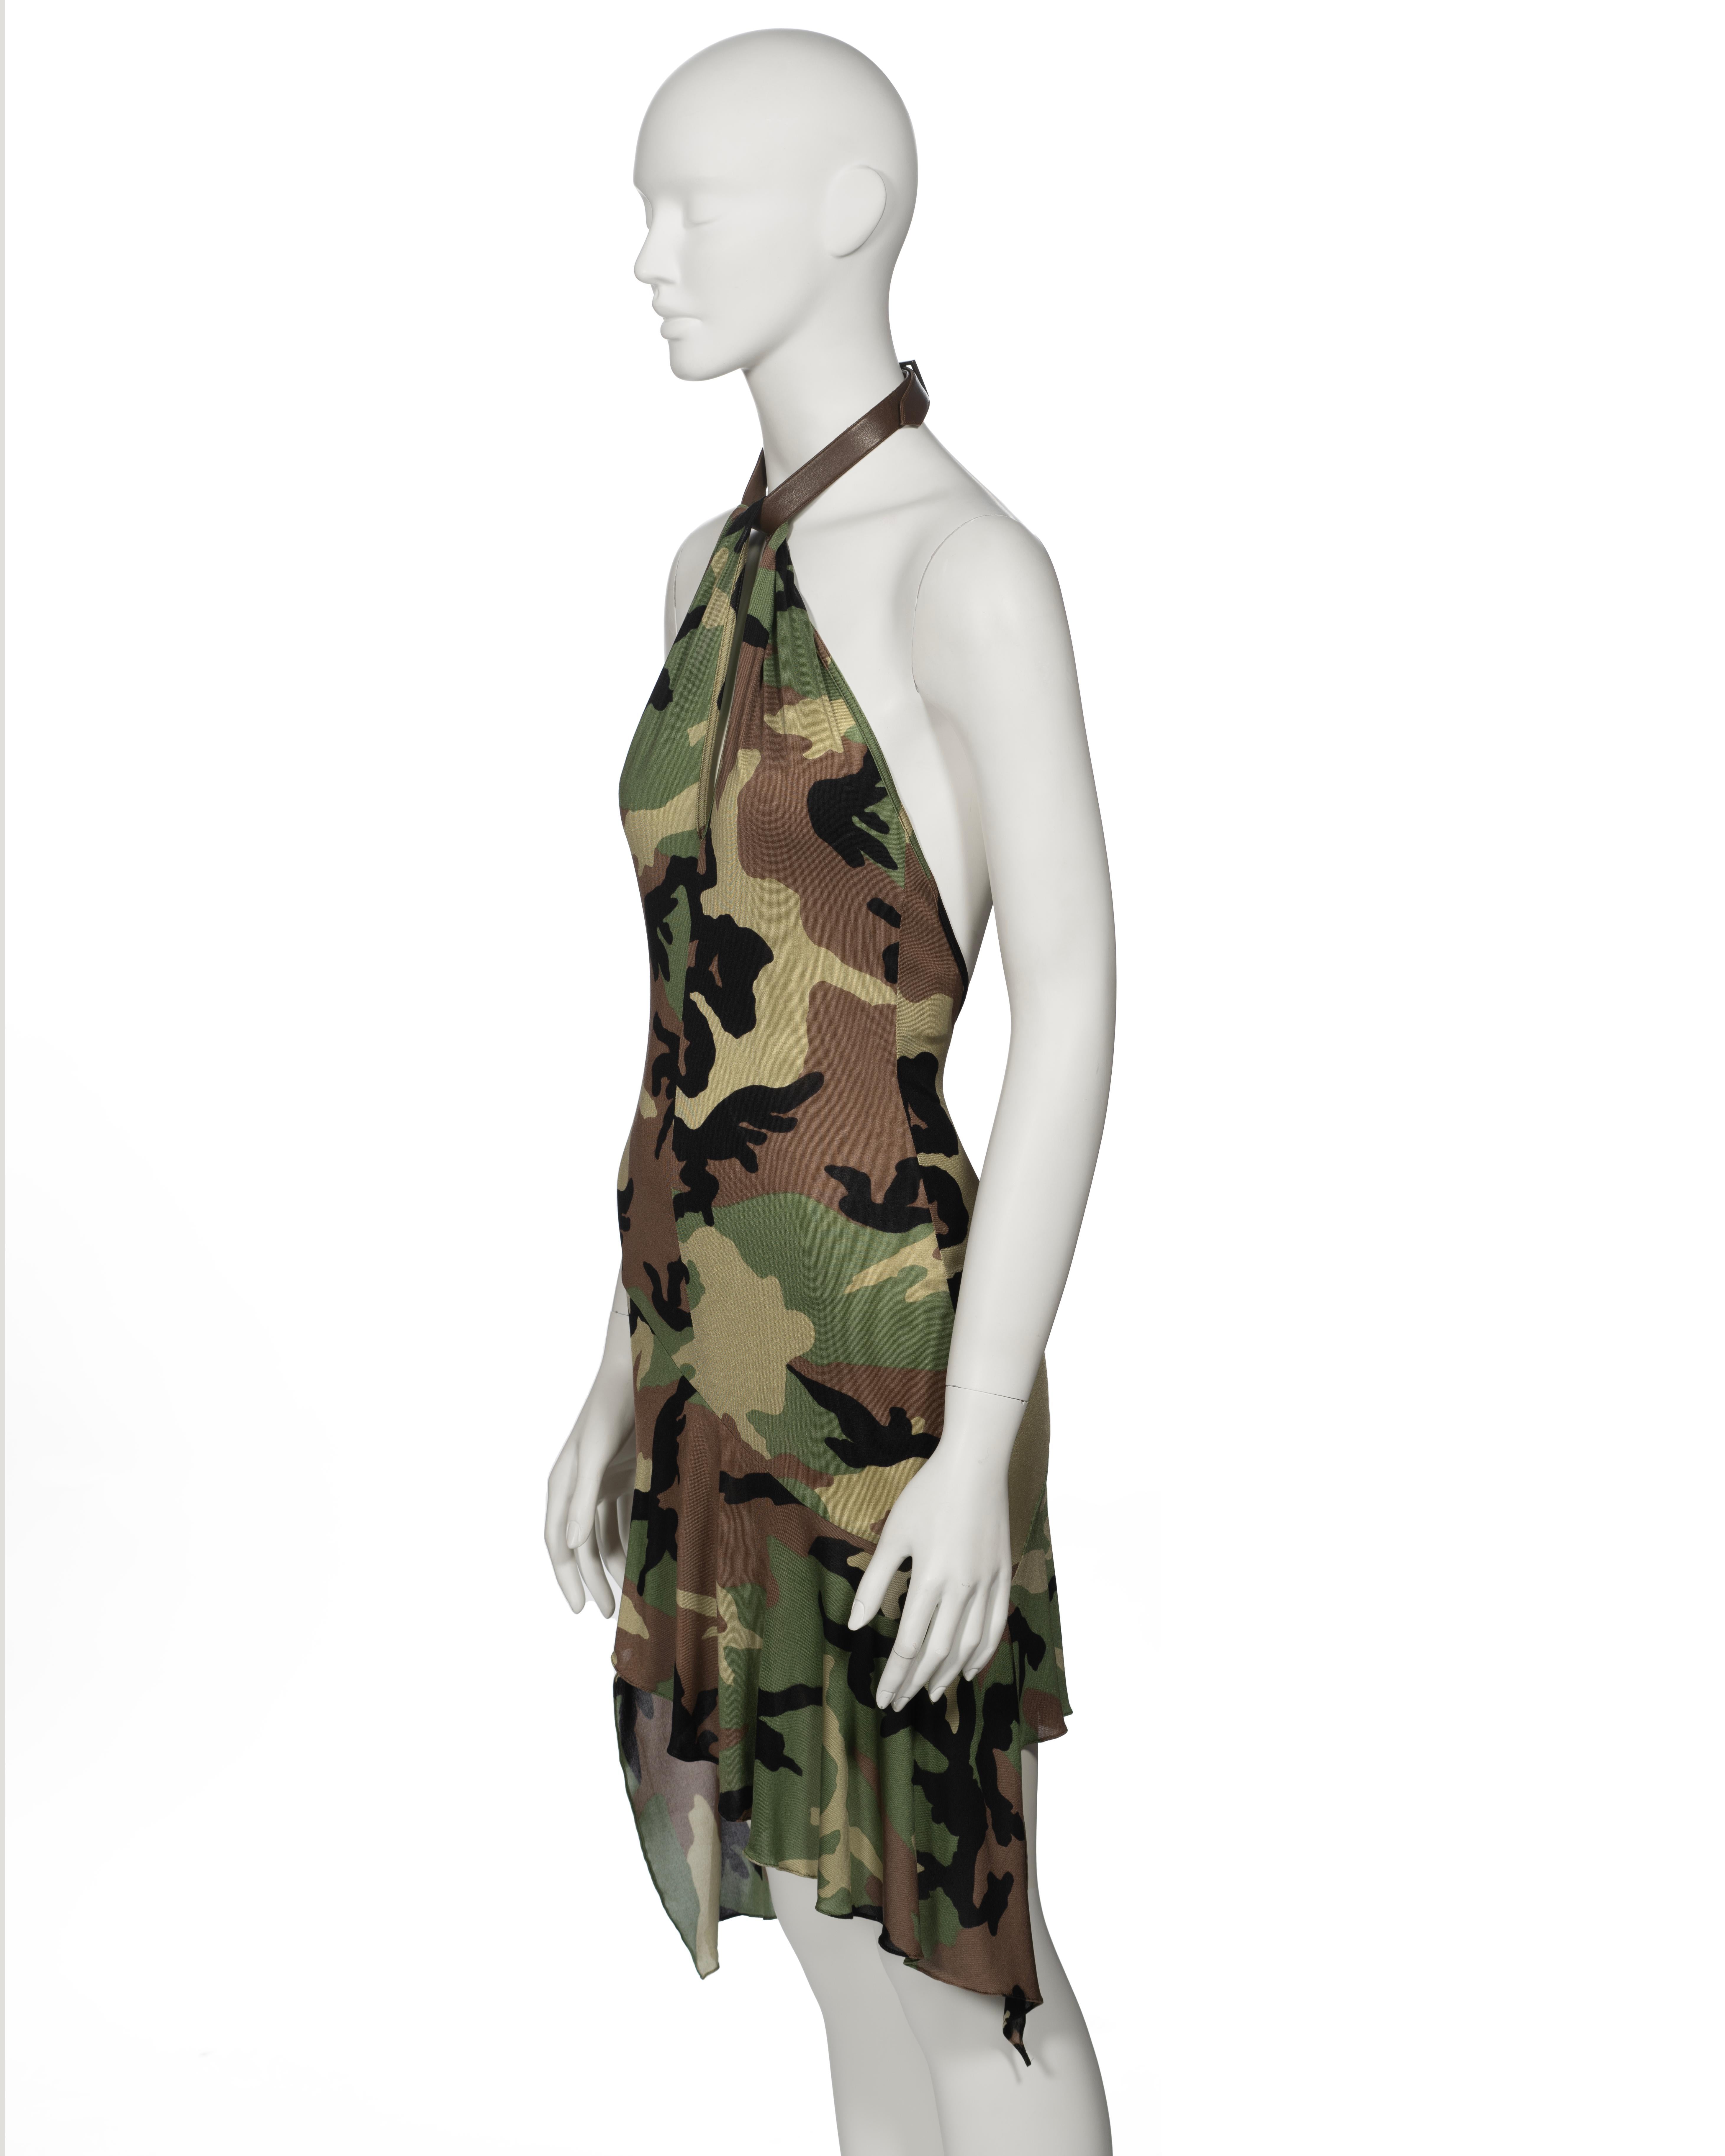 Christian Dior by John Galliano Cameo Print Silk Jersey Halter Dress, ss 2001 For Sale 6